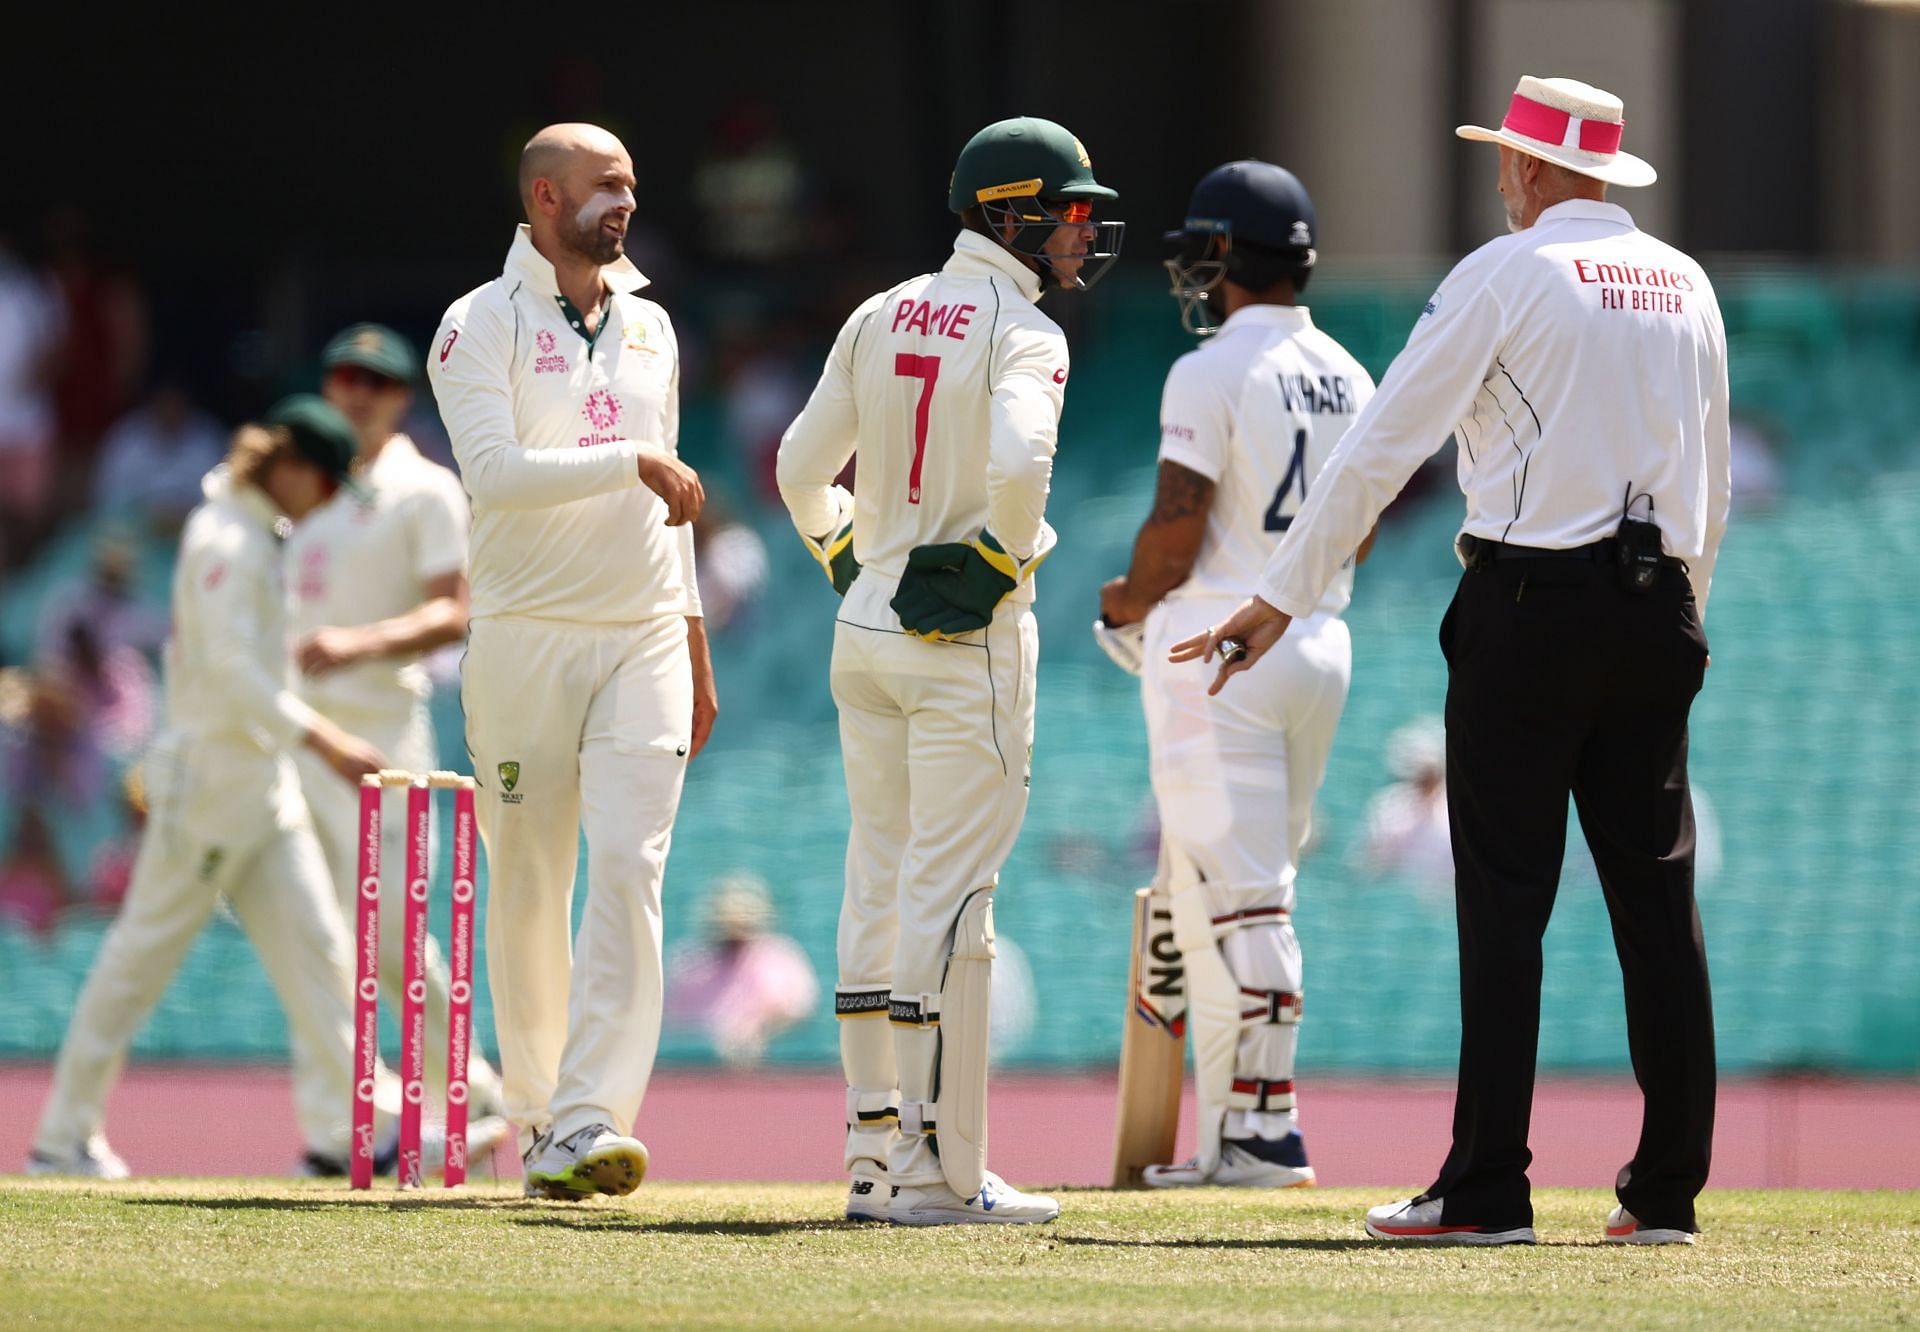 Tim Paine questions umpire Paul Wilson over the DRS decision going in favor of Cheteshwar Pujara. Pic: Getty Images